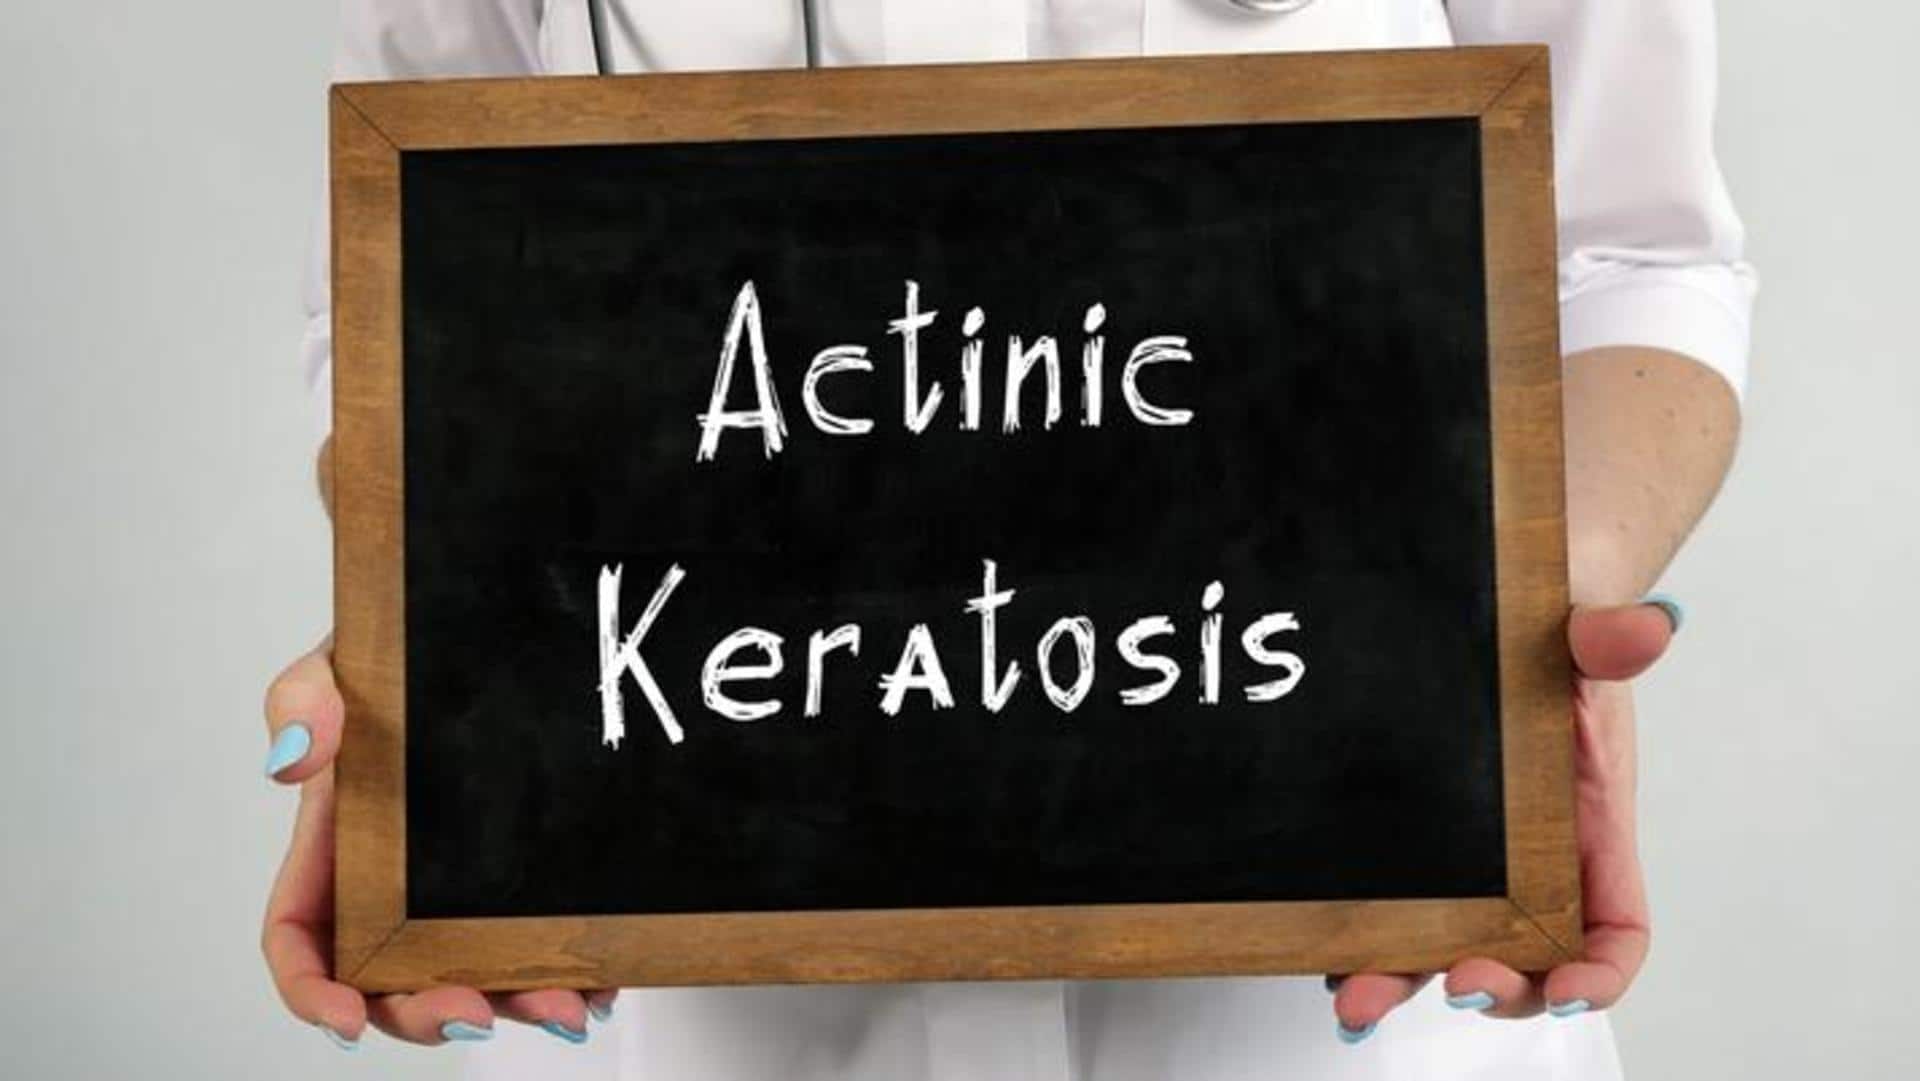 Actinic keratosis: Know about causes, symptoms, and treatment